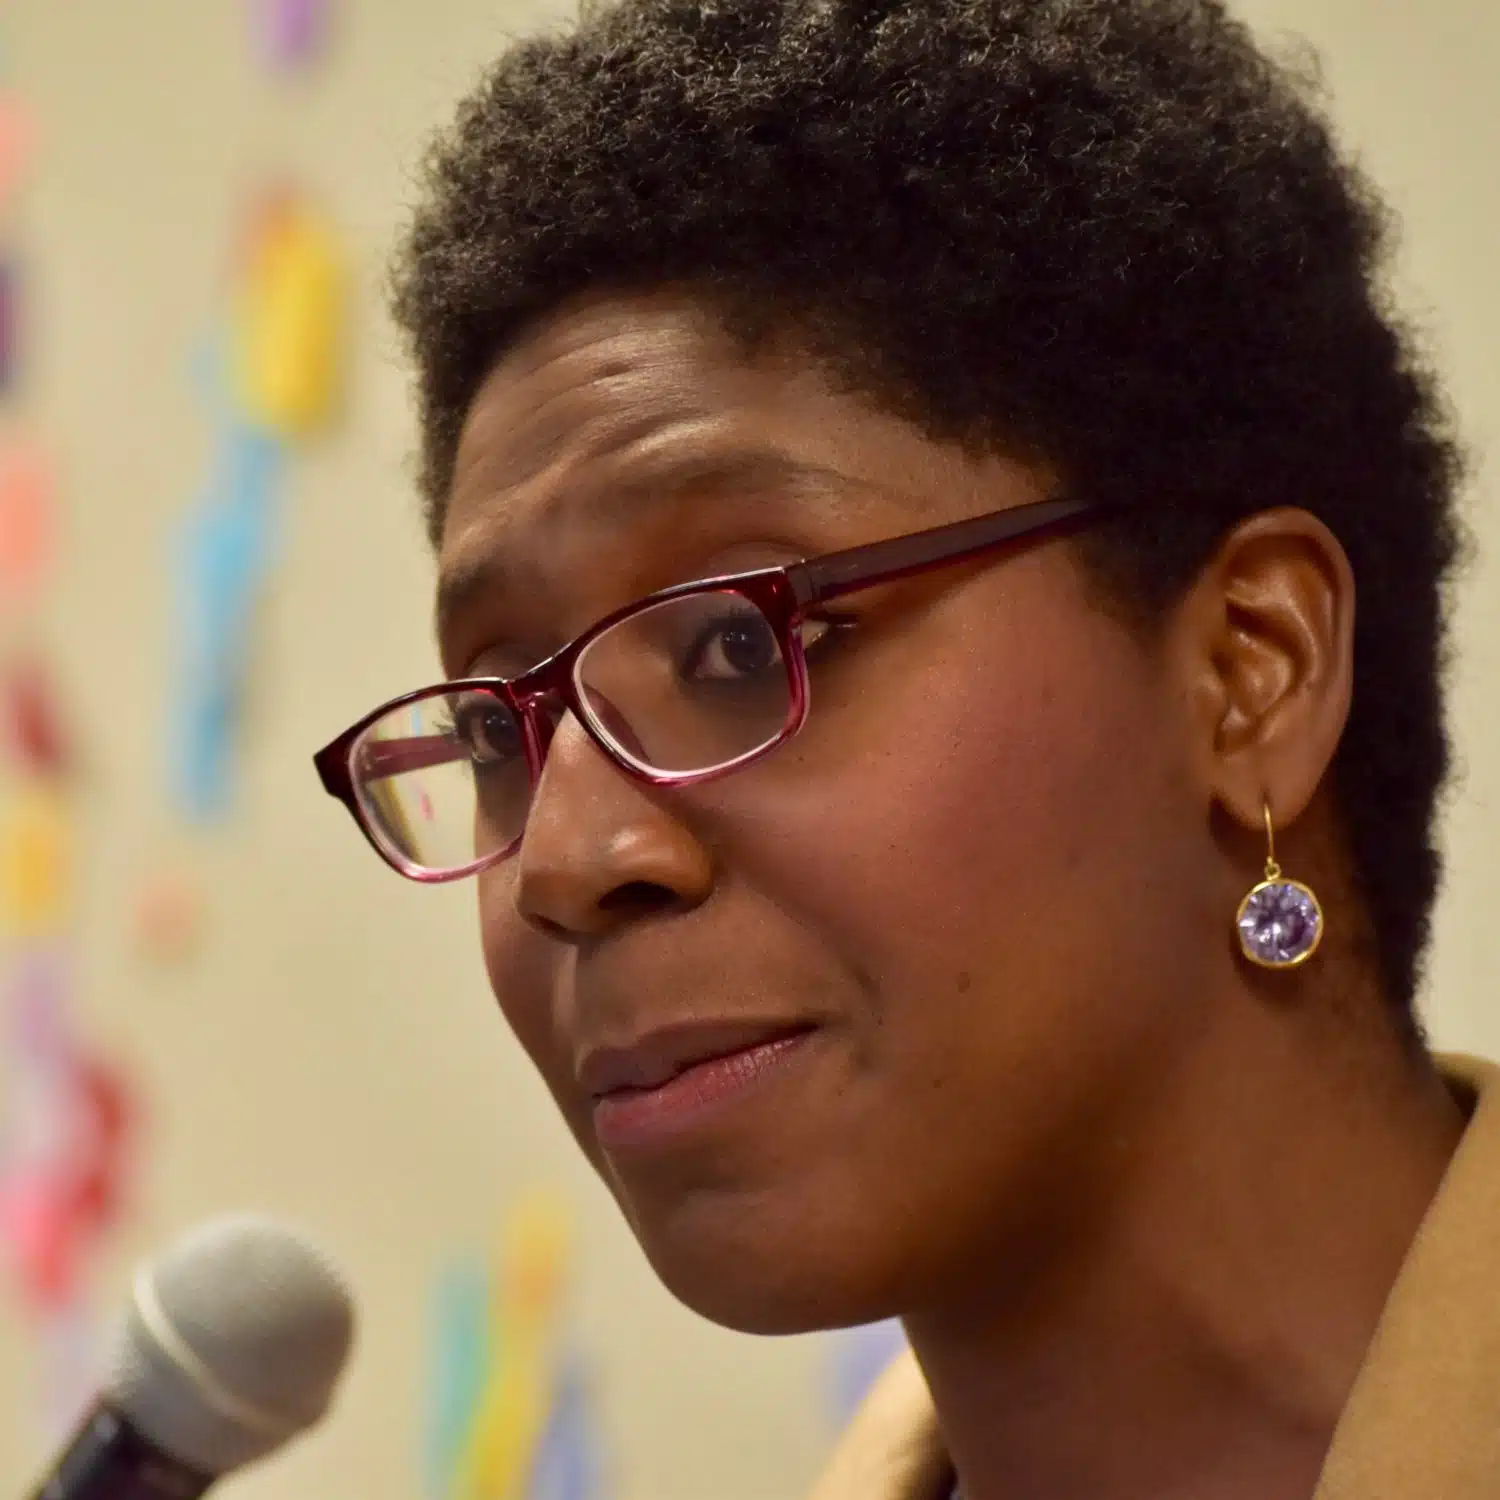 Providence City Councilor Nirva LaFortune: We must counter darkness and hate with love and light